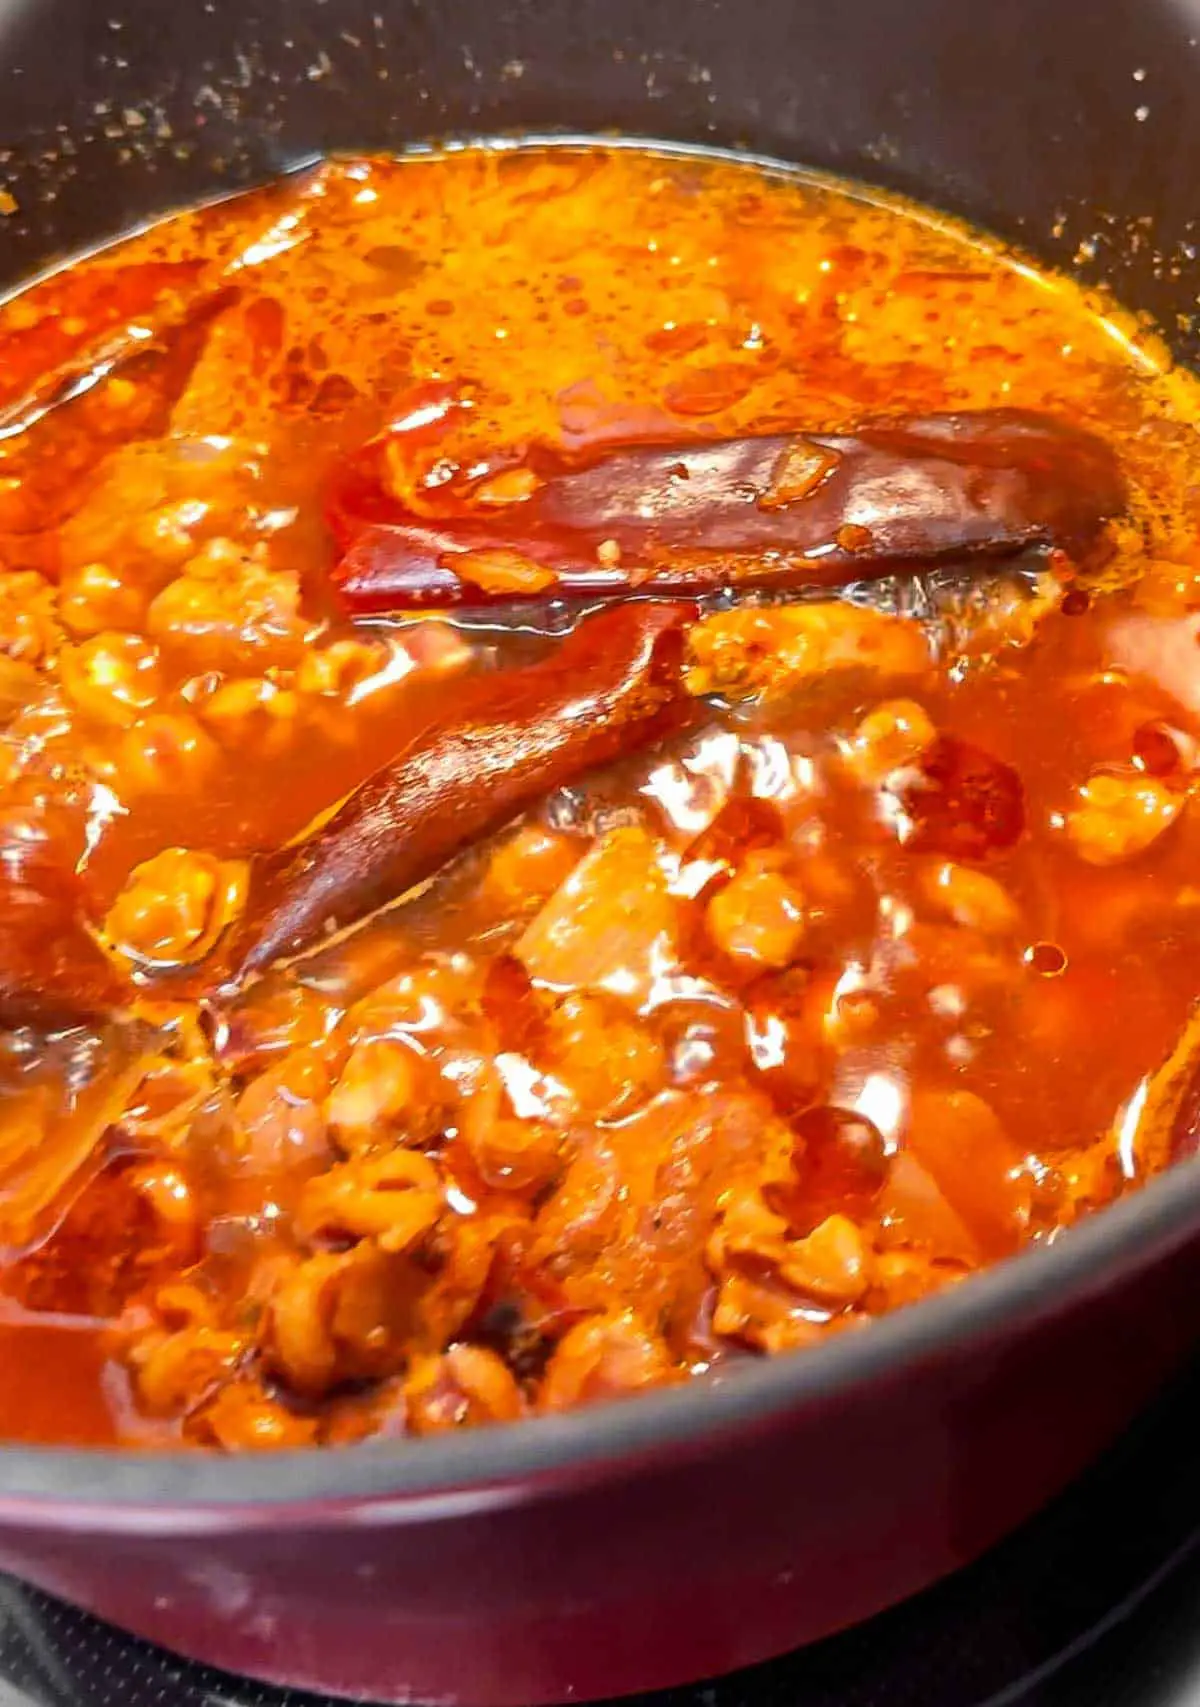 A large pot containing pork posole in a seasoned broth with red chiles.